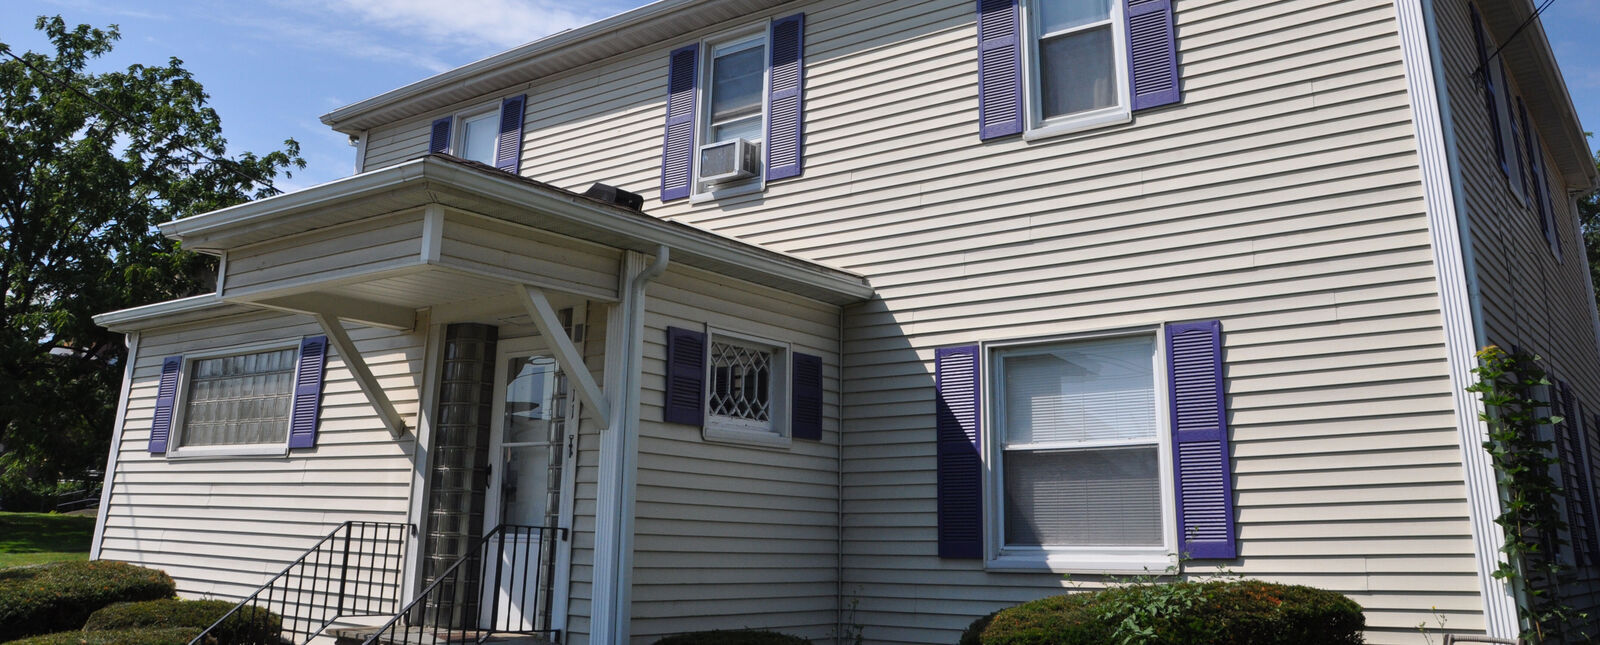 The exterior of the Alumni House with tan siding and purple shutters.